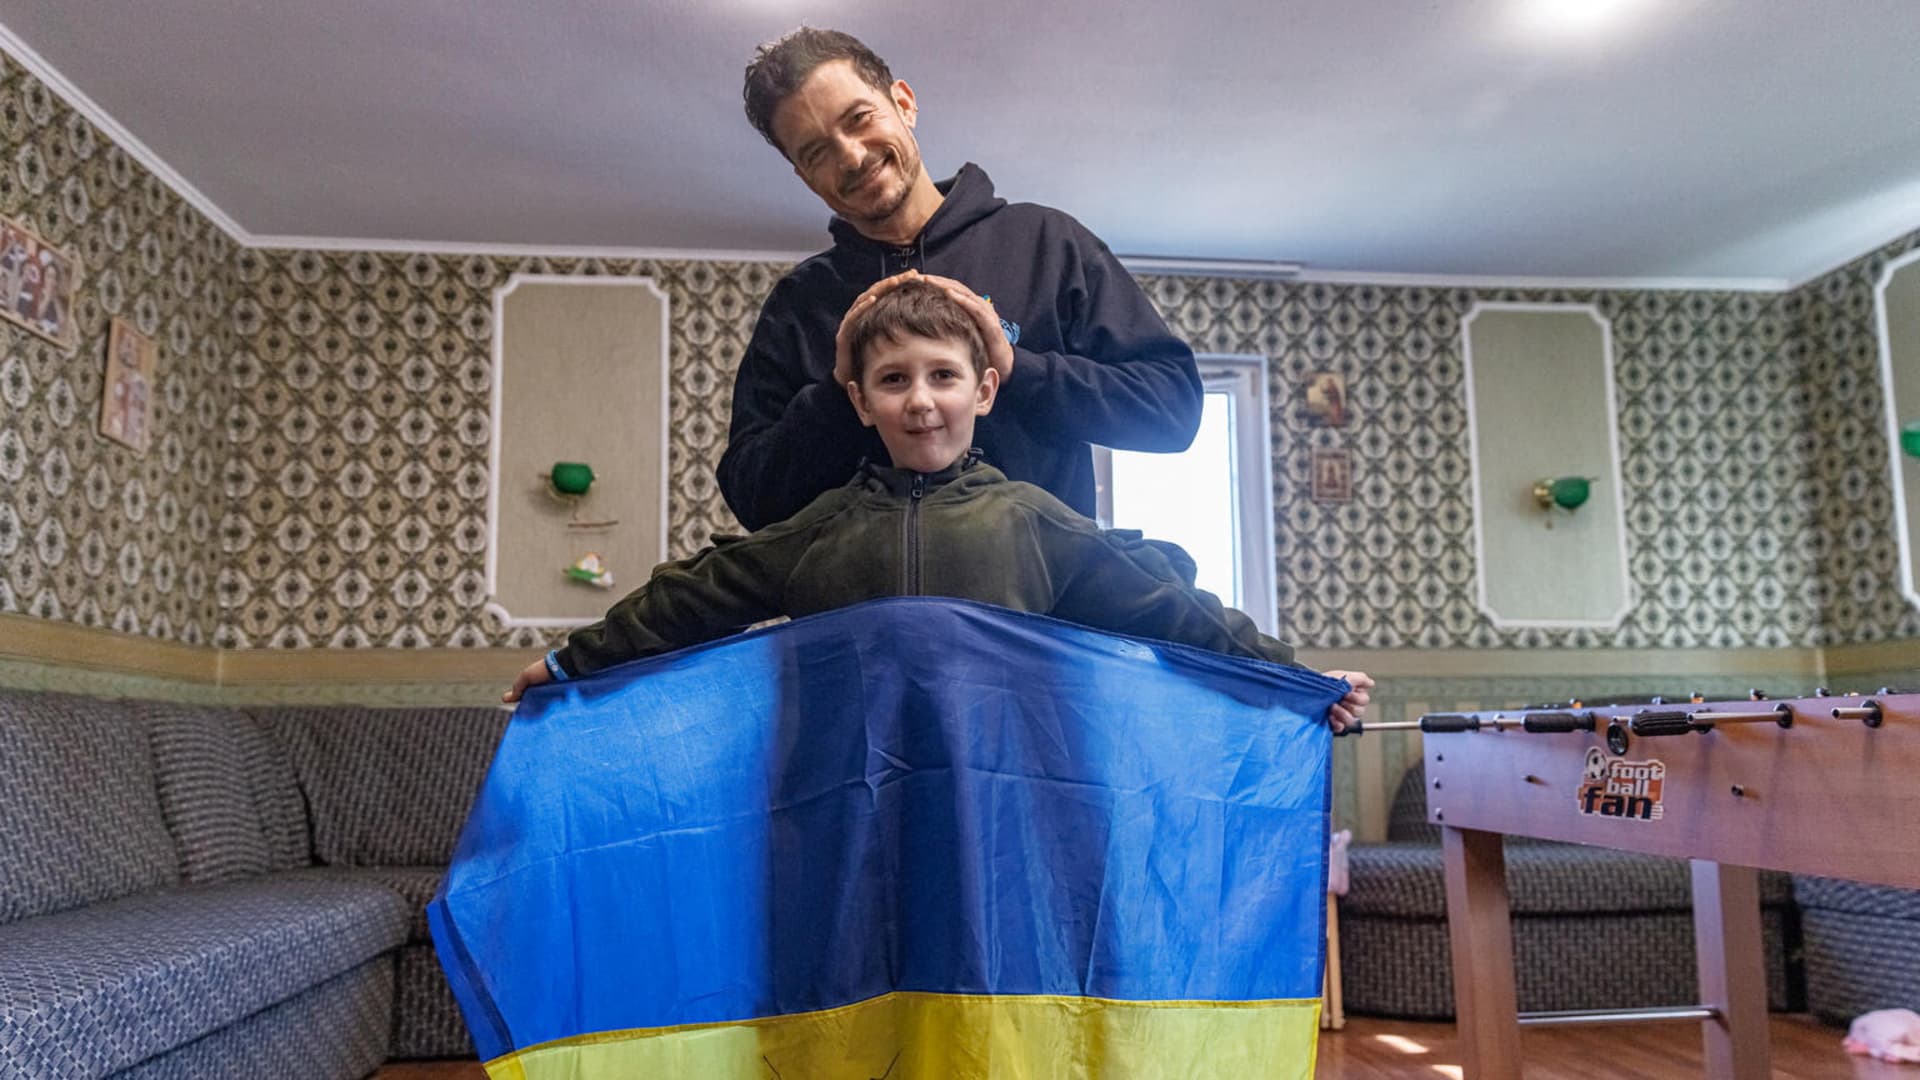 Actor and UNICEF Goodwill Ambassador Orlando Bloom poses with Yehor, 8, holding a Ukrainian flag signed by Orlando, in Demydiv, Ukraine, March 26, 2023 in this handout image. UNICEF/Skyba/Handout via REUTERS THIS IMAGE HAS BEEN SUPPLIED BY A THIRD PARTY. MANDATORY CREDIT. NO RESALES. NO ARCHIVES